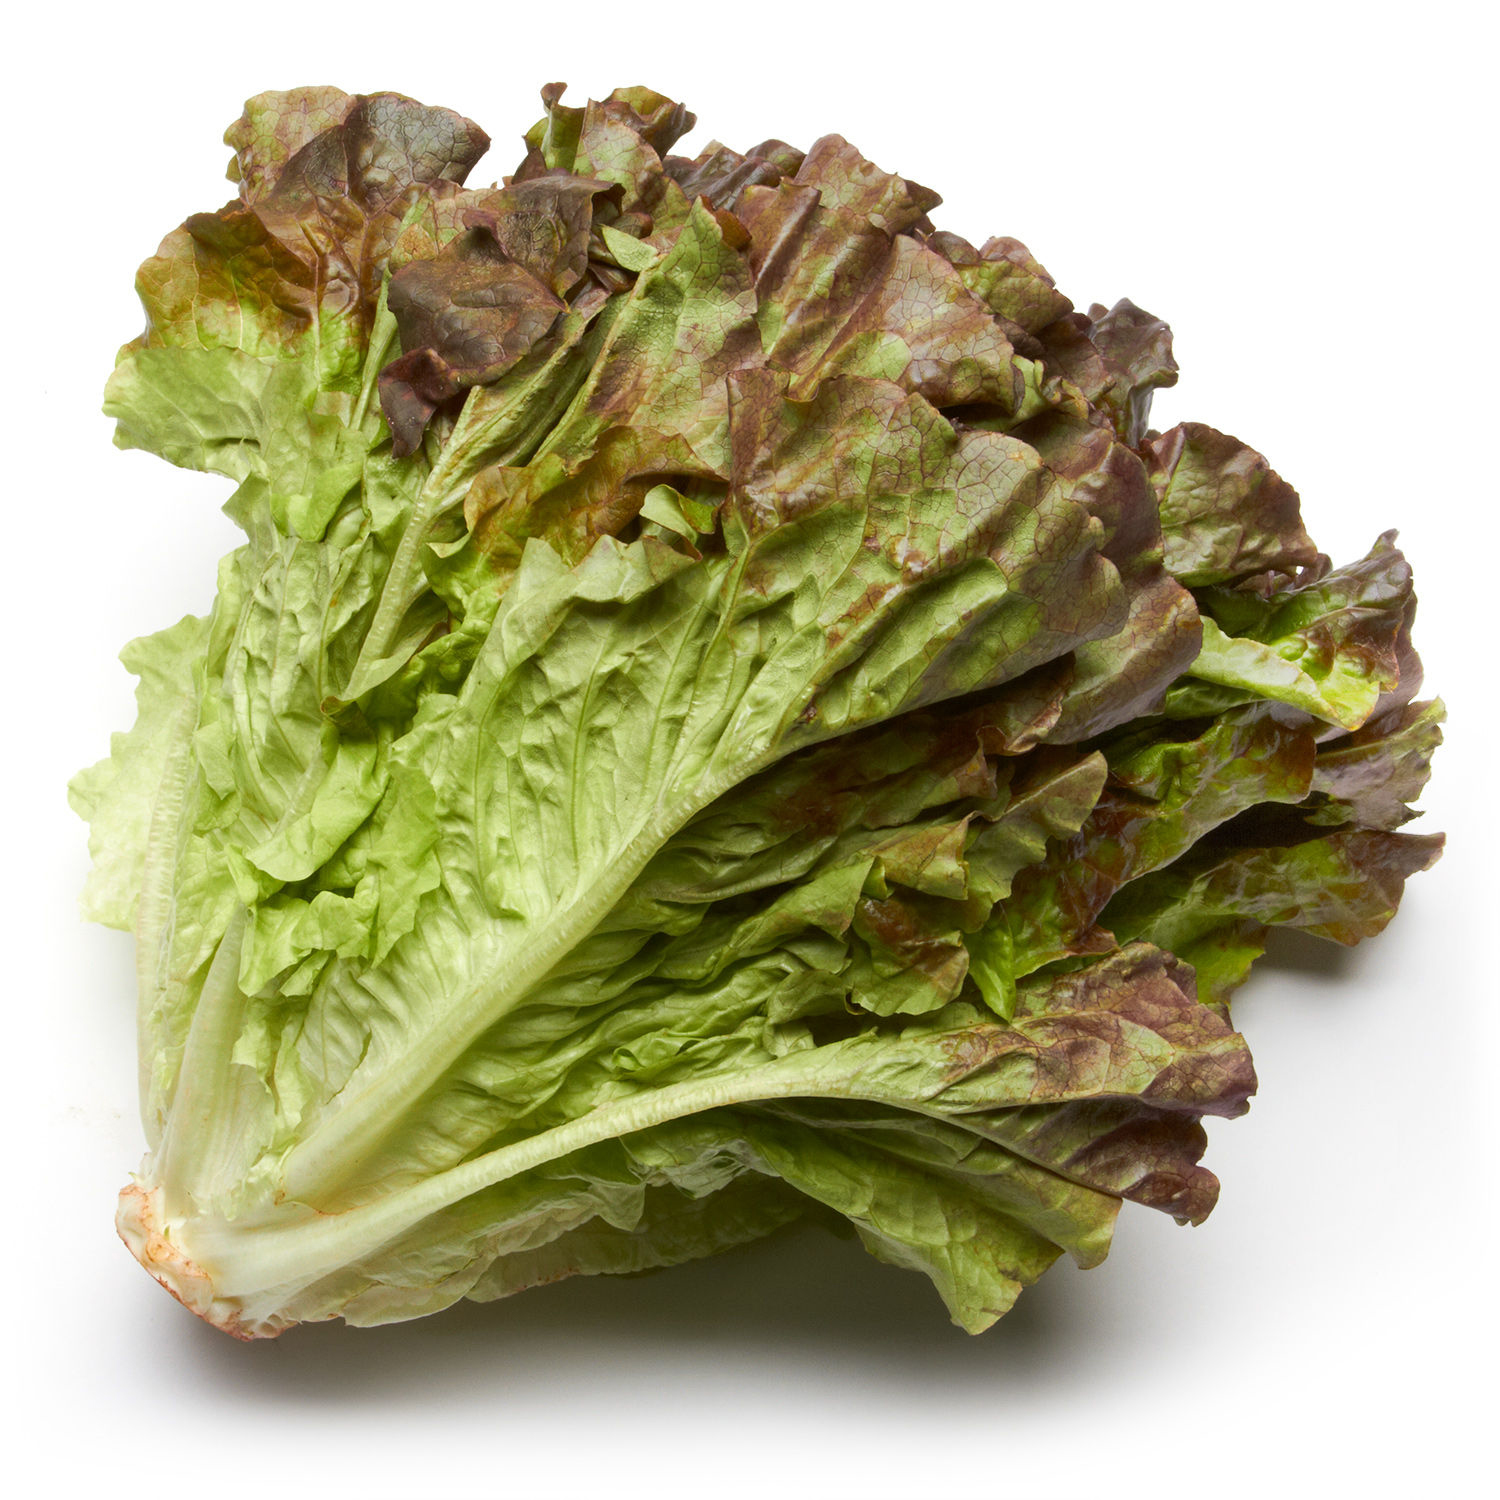 Red Leaf Lettuce, Health Benefits and Nutritional Value